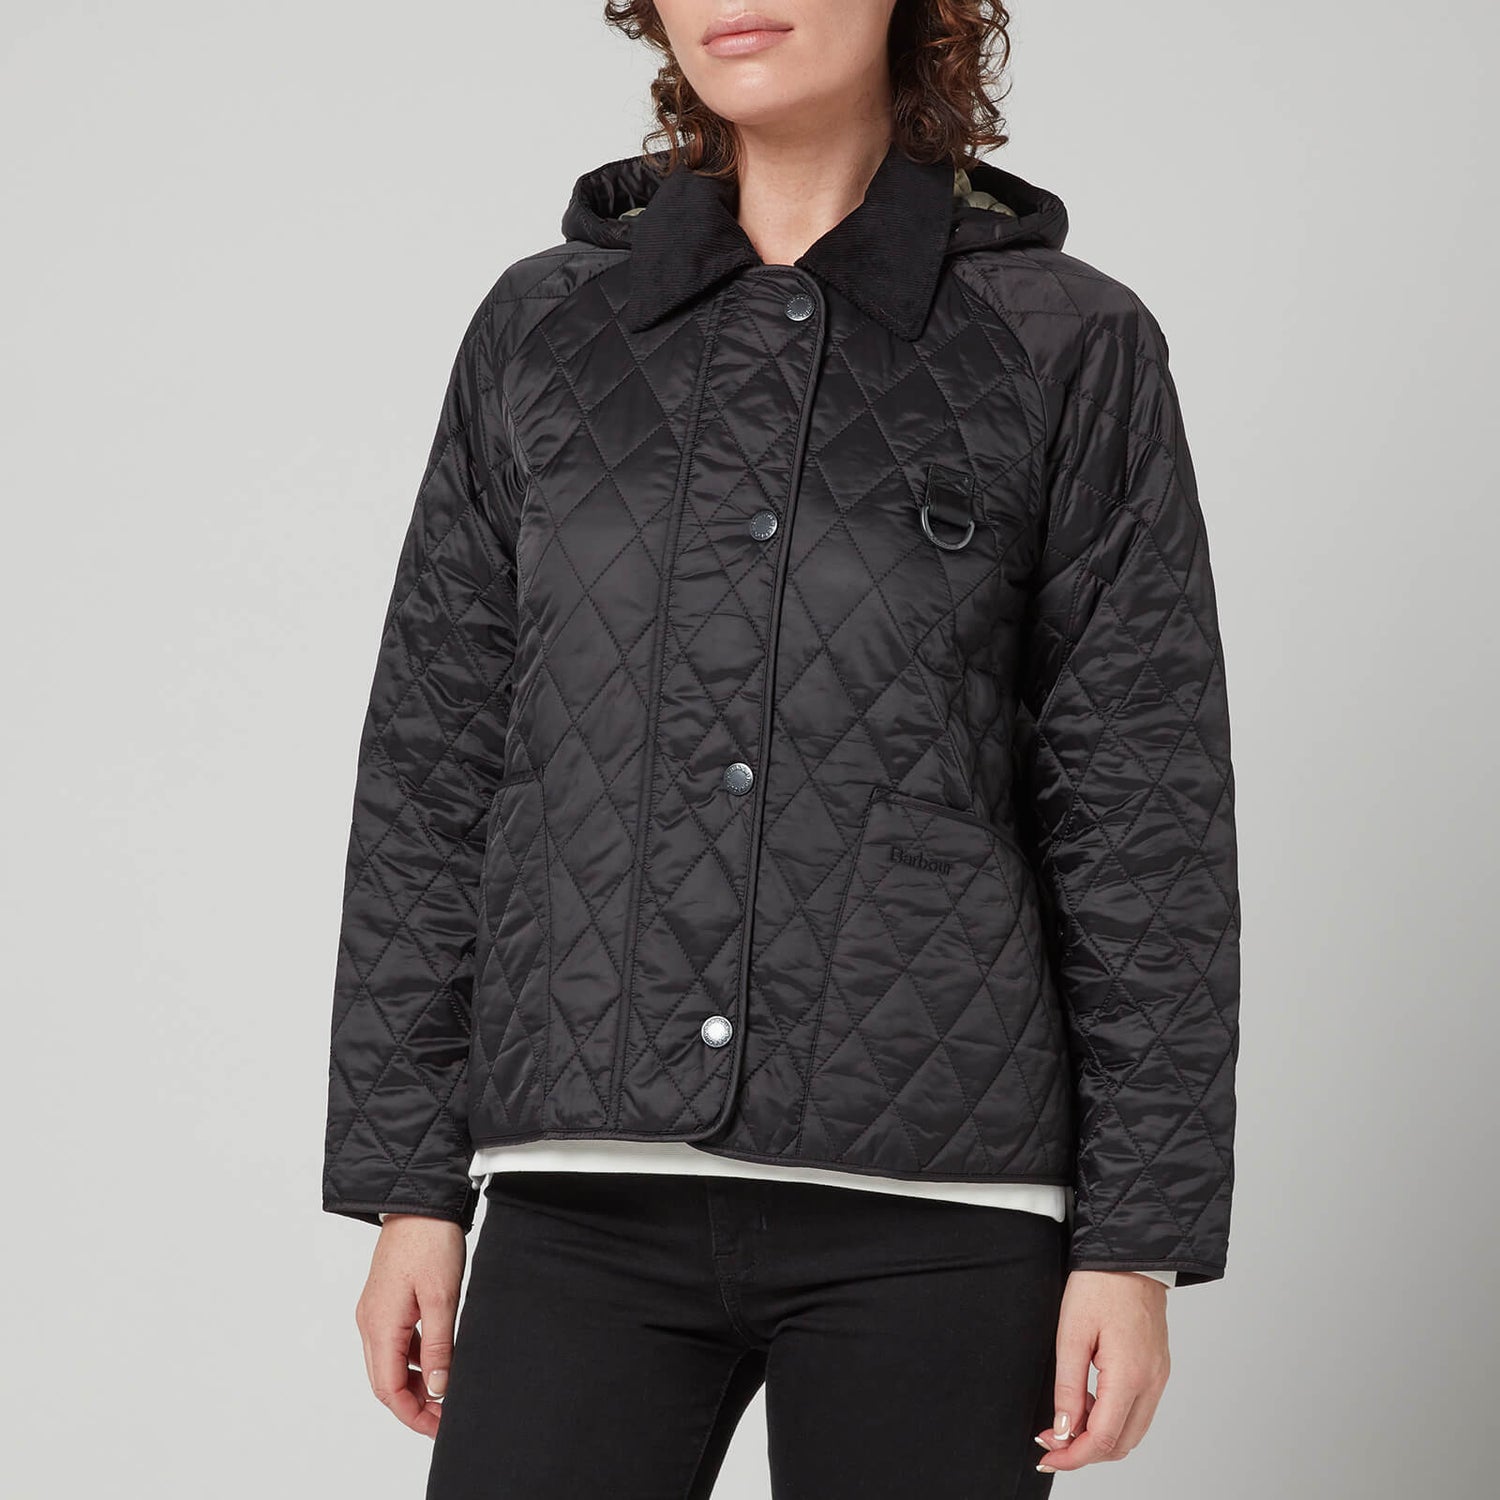 Barbour Women's Tobymory Quilted Jacket - Black/Ancient